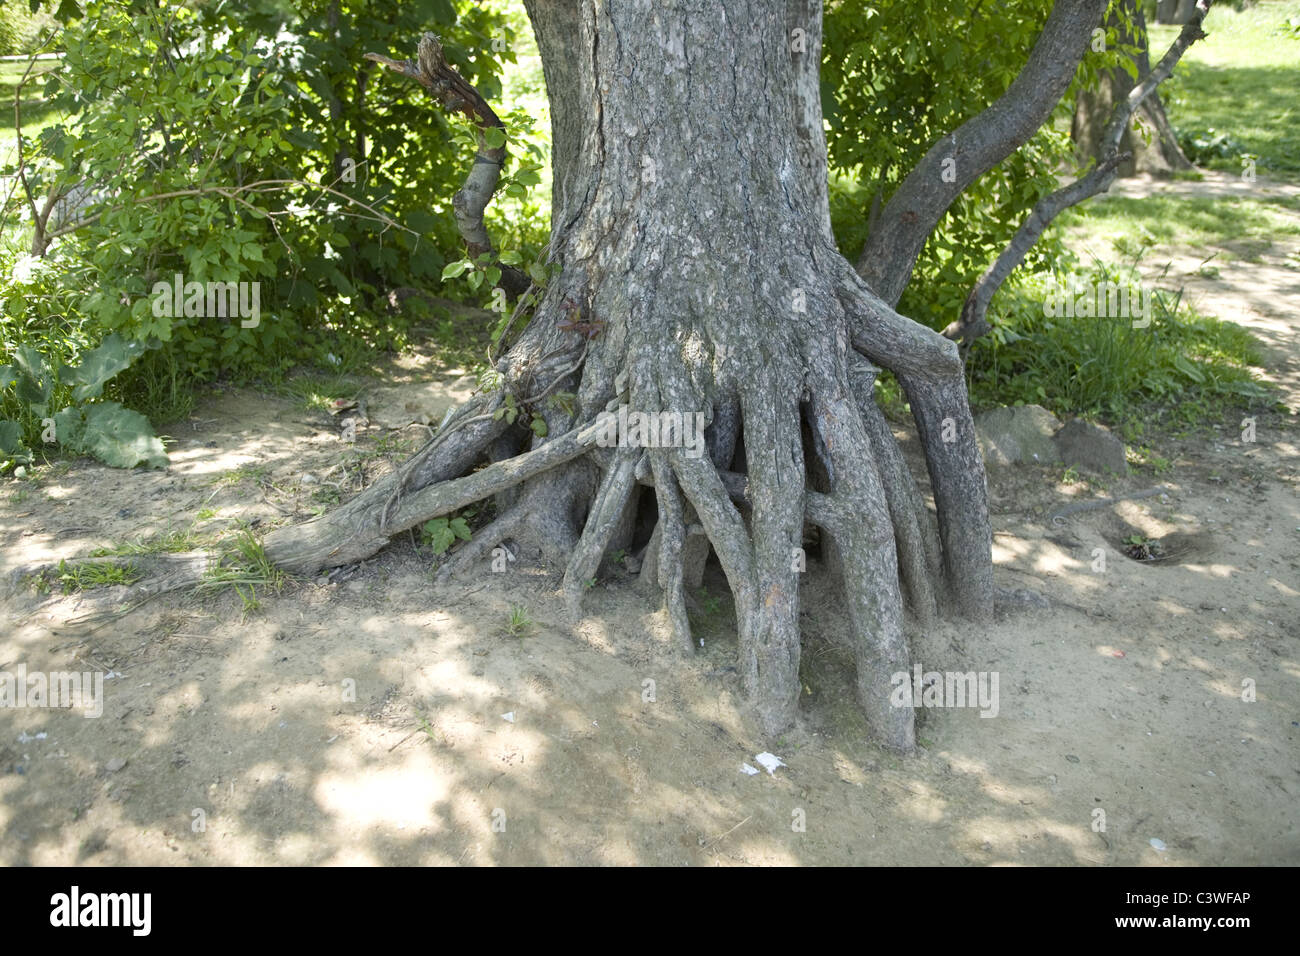 Erosion exposes tree roots in Prospect Park, Brooklyn, New York. Stock Photo